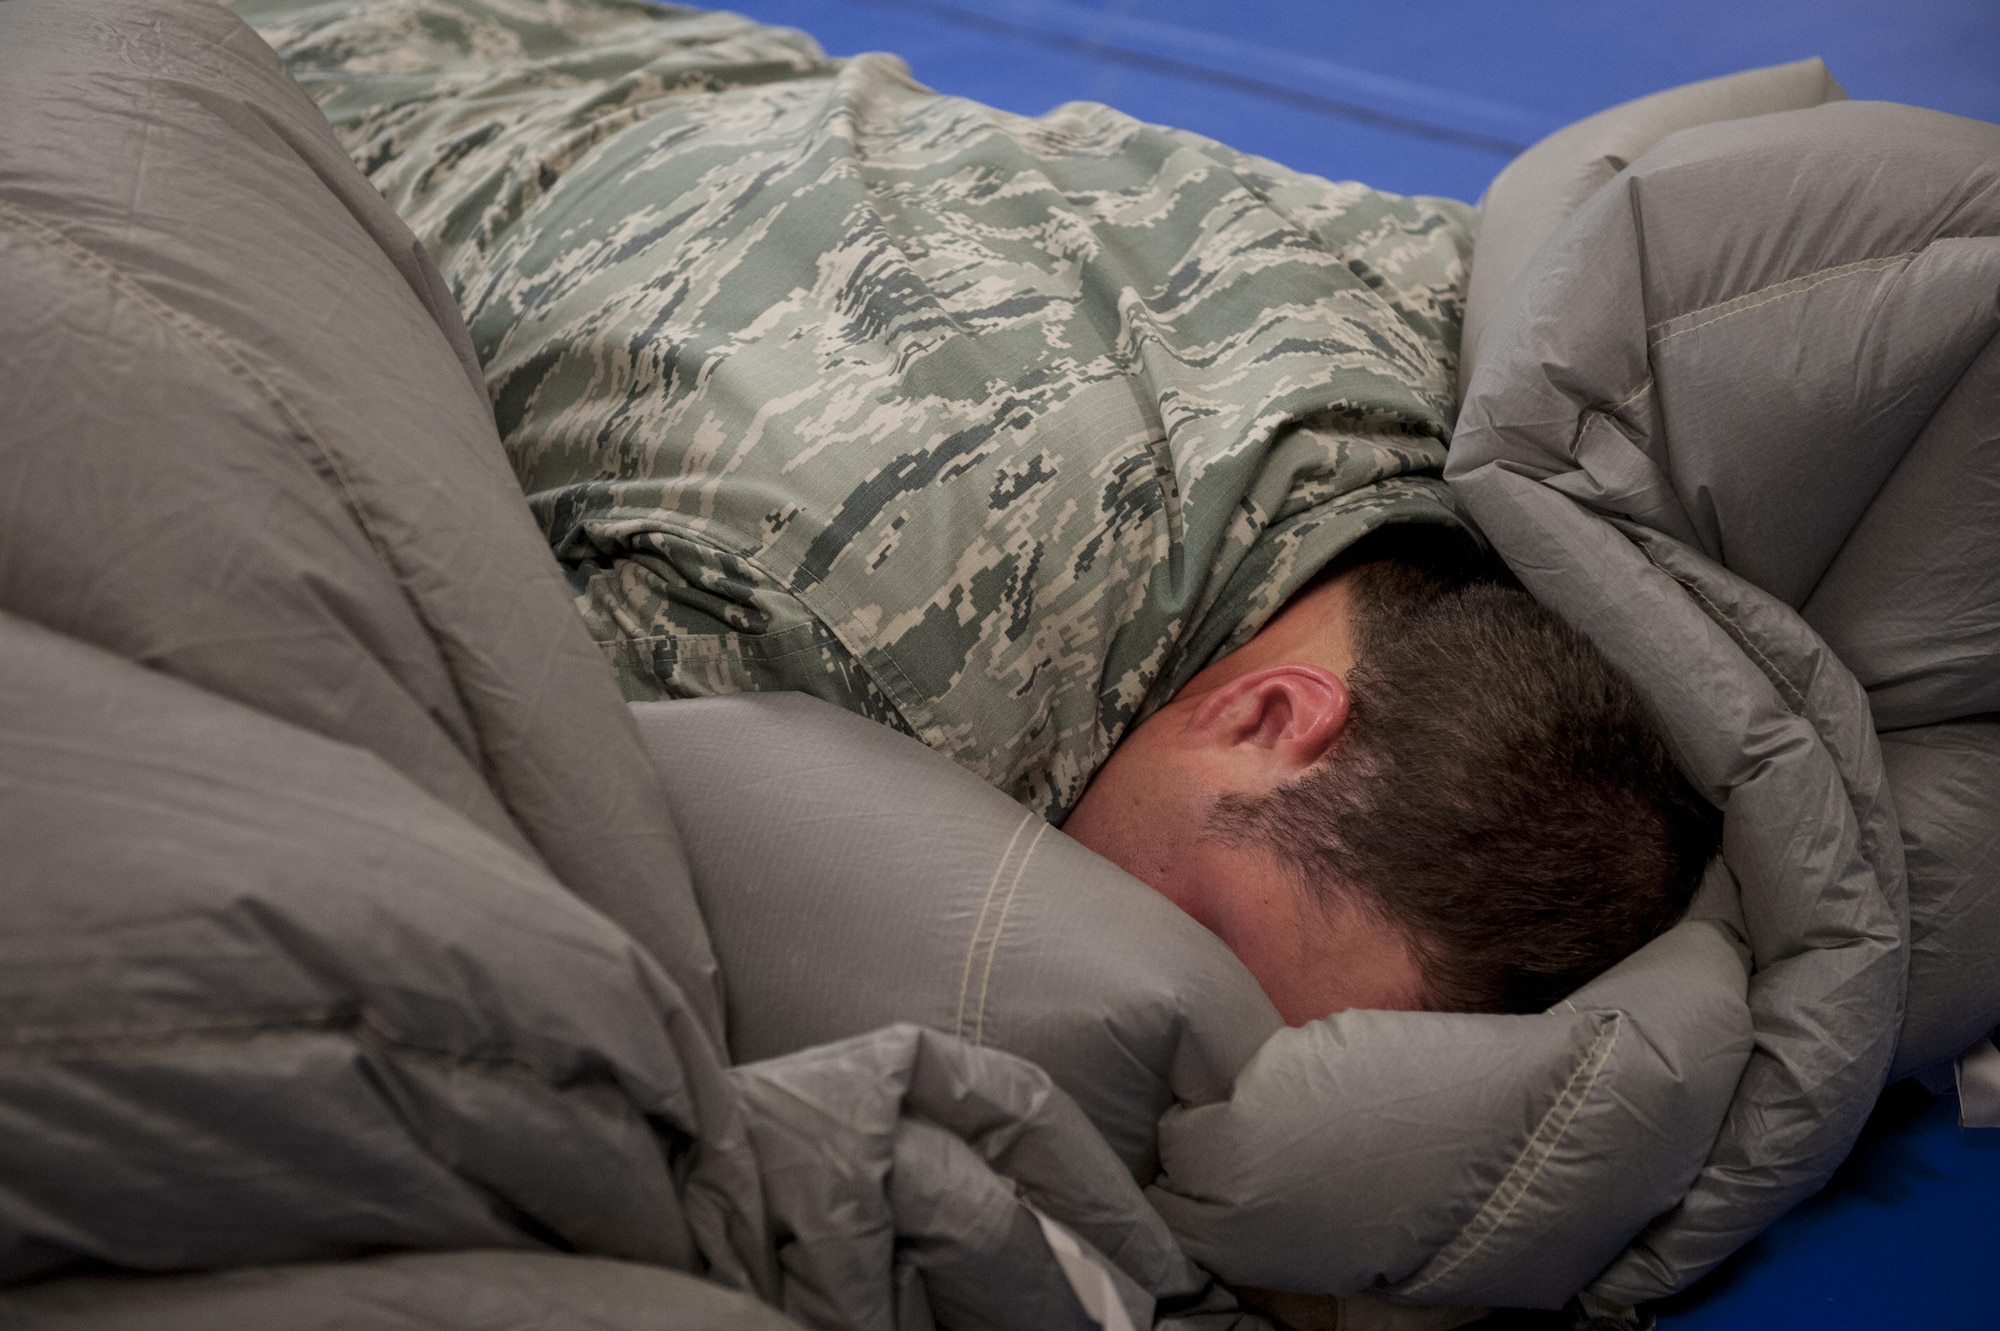 U.S. Air Force Senior Airman Erik Merrill, 31st Rescue Squadron aircrew flight equipment journeyman, cocoons a parachute canopy June 20, 2016, at Kadena Air Base, Japan. Merrill applied his entire body weight on top of the canopy in order to push out all the air between folds, enabling him to pack it into a small deployment bag. (U.S. Air Force photo by Senior Airman Peter Reft)